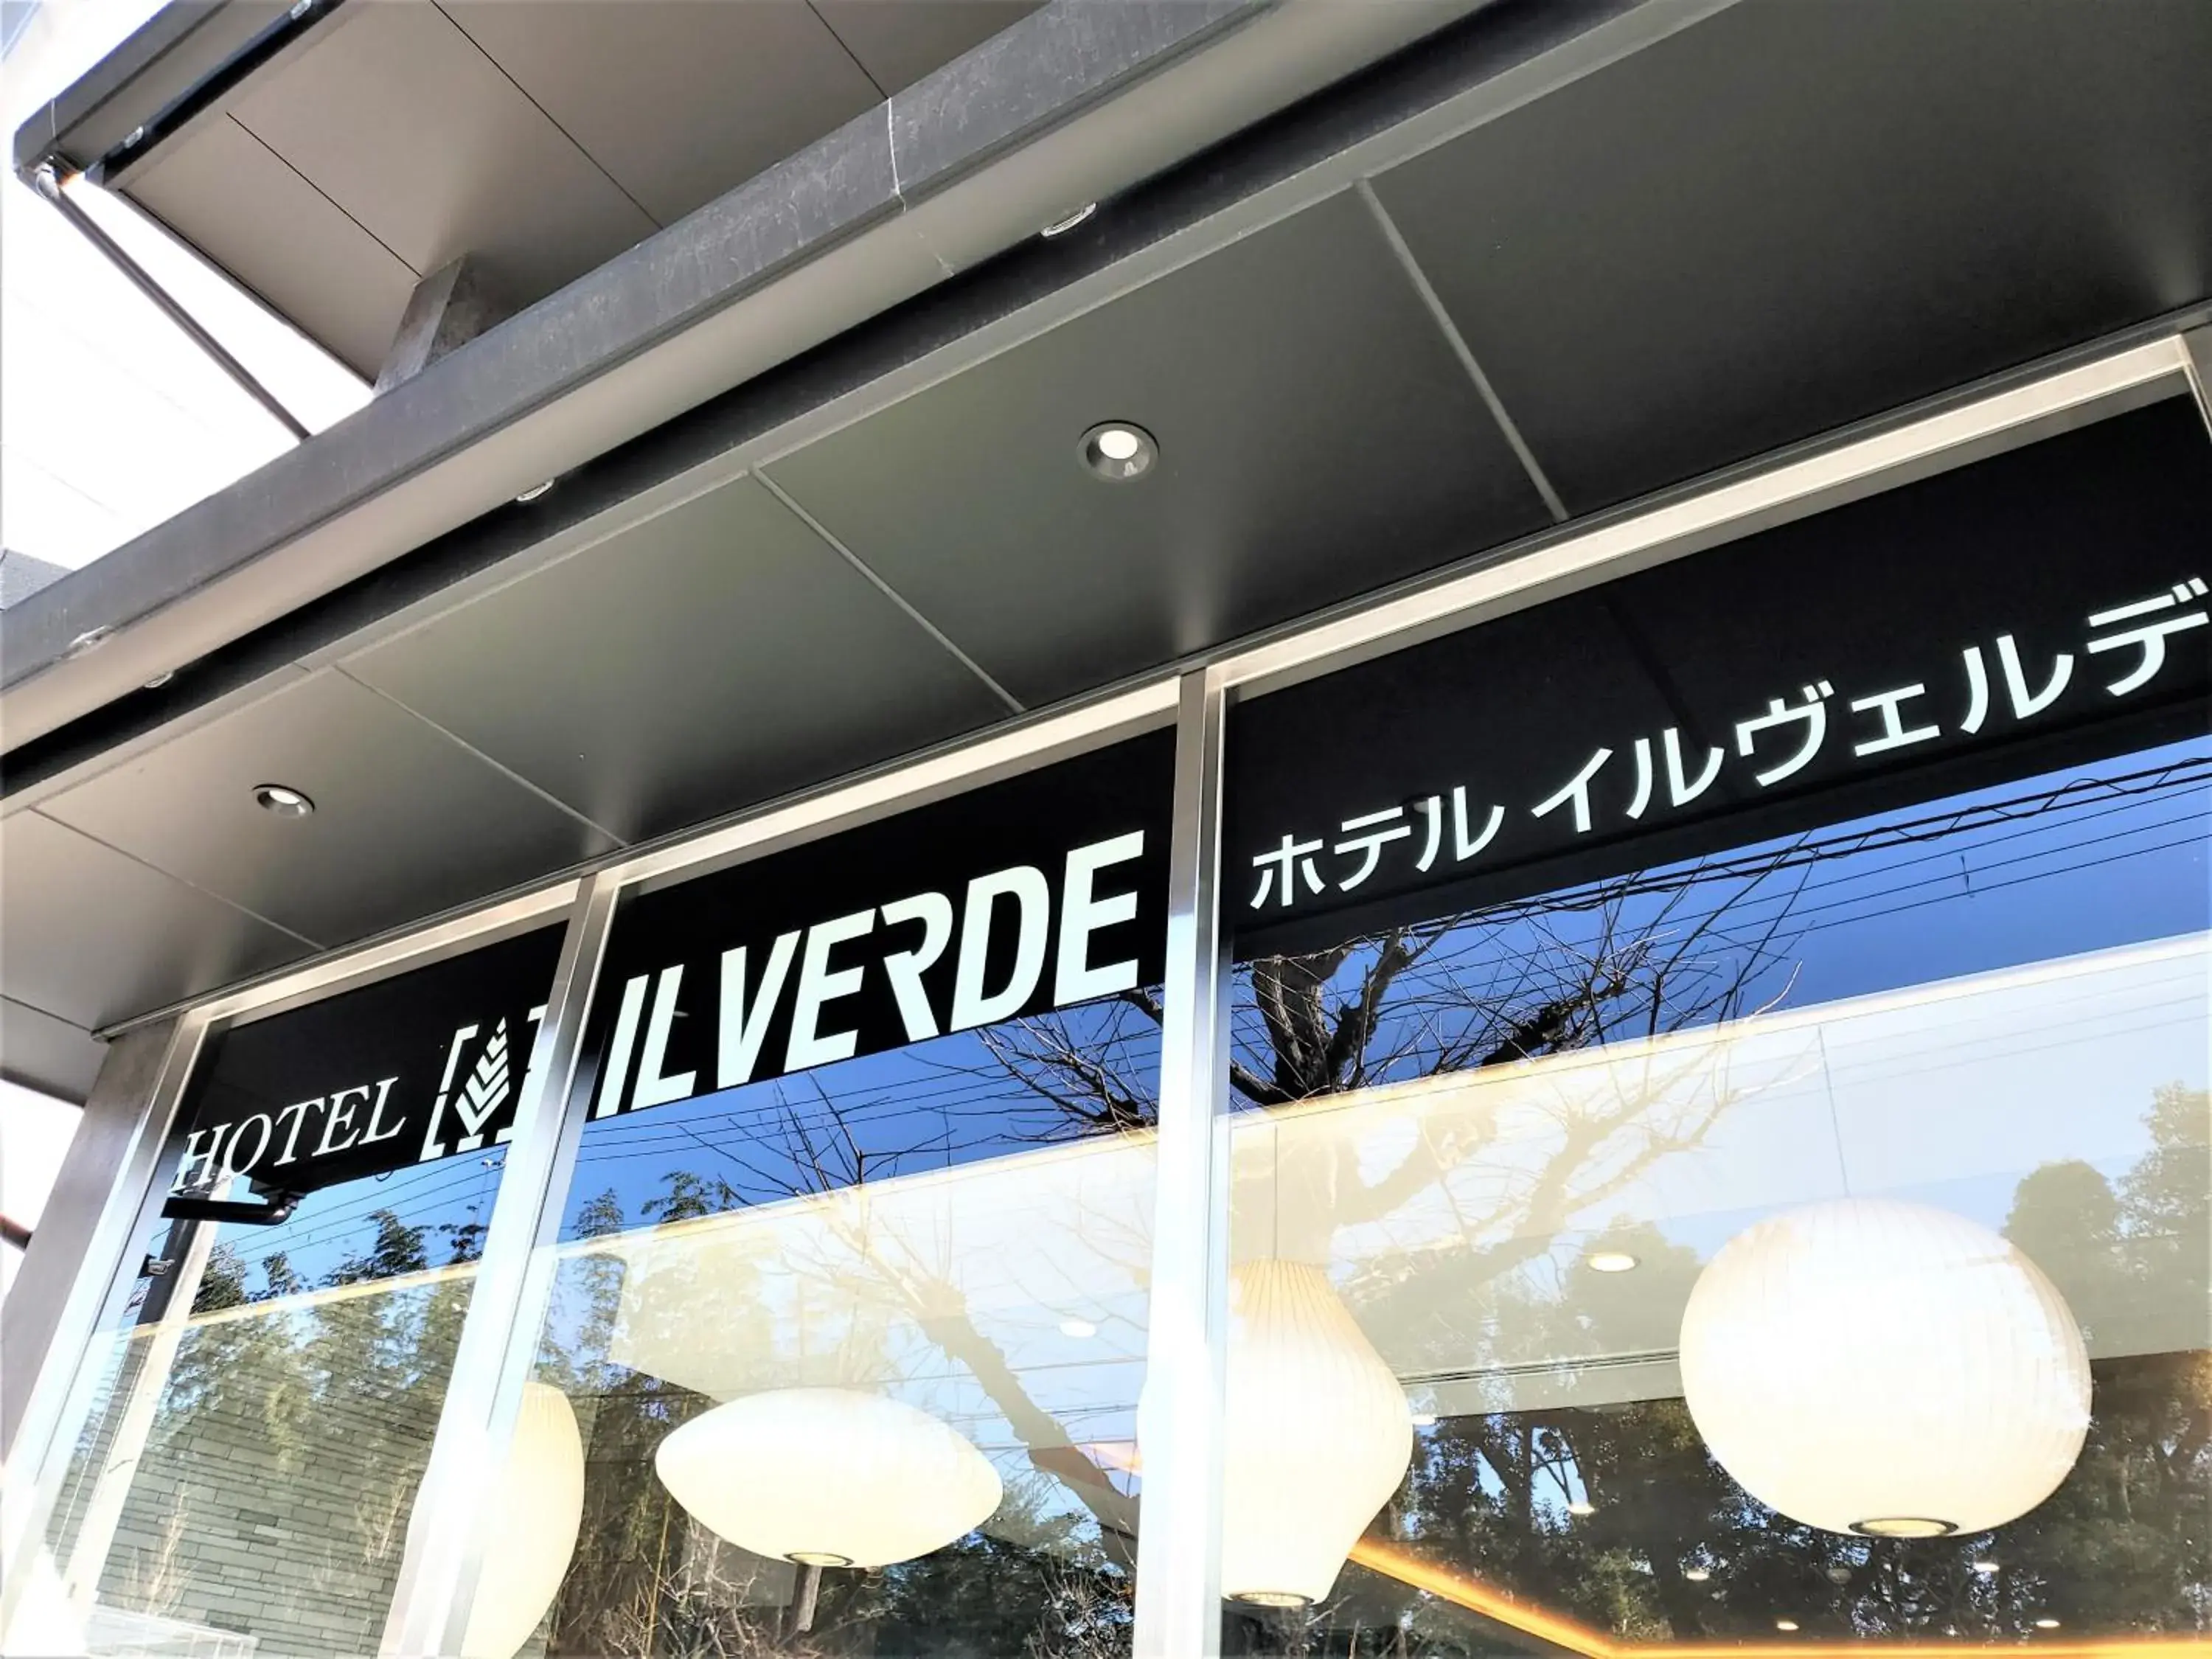 Property logo or sign in Hotel IL Verde Kyoto